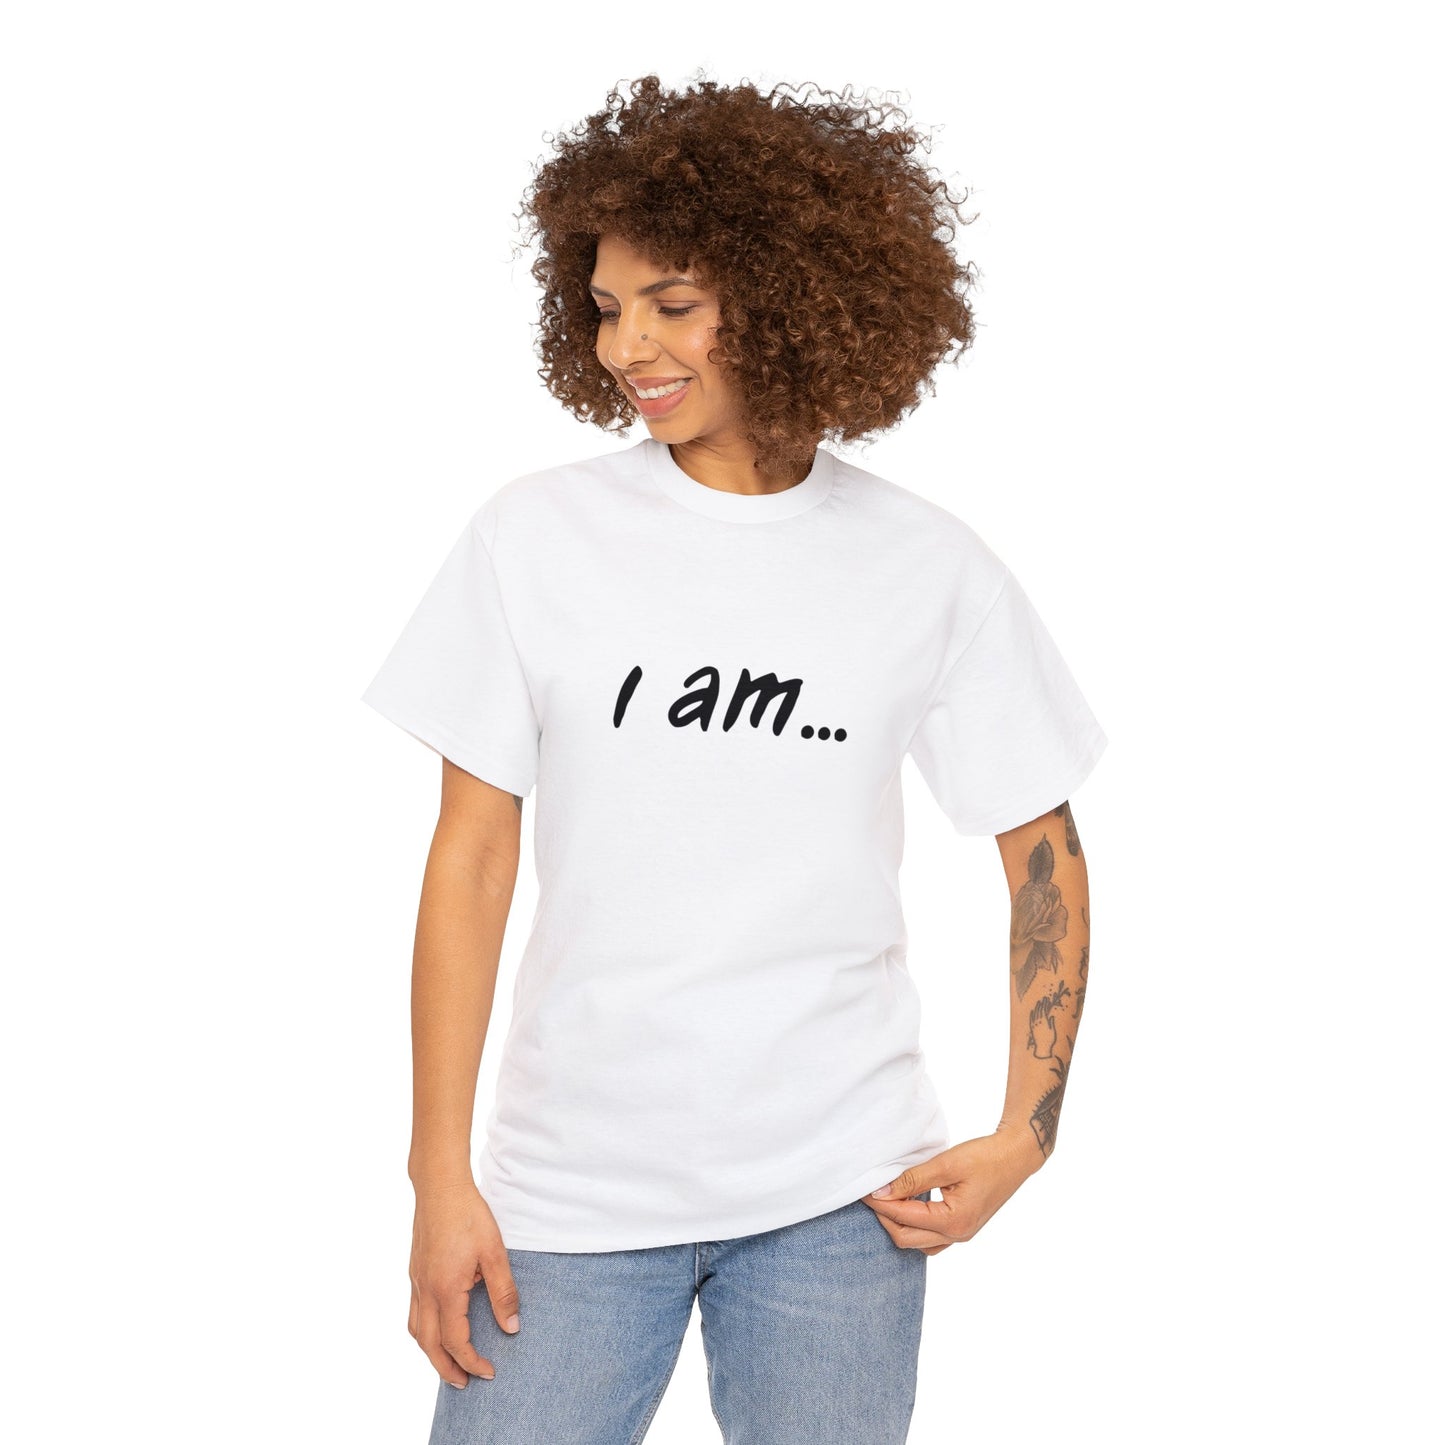 'I am...'autism aware' people